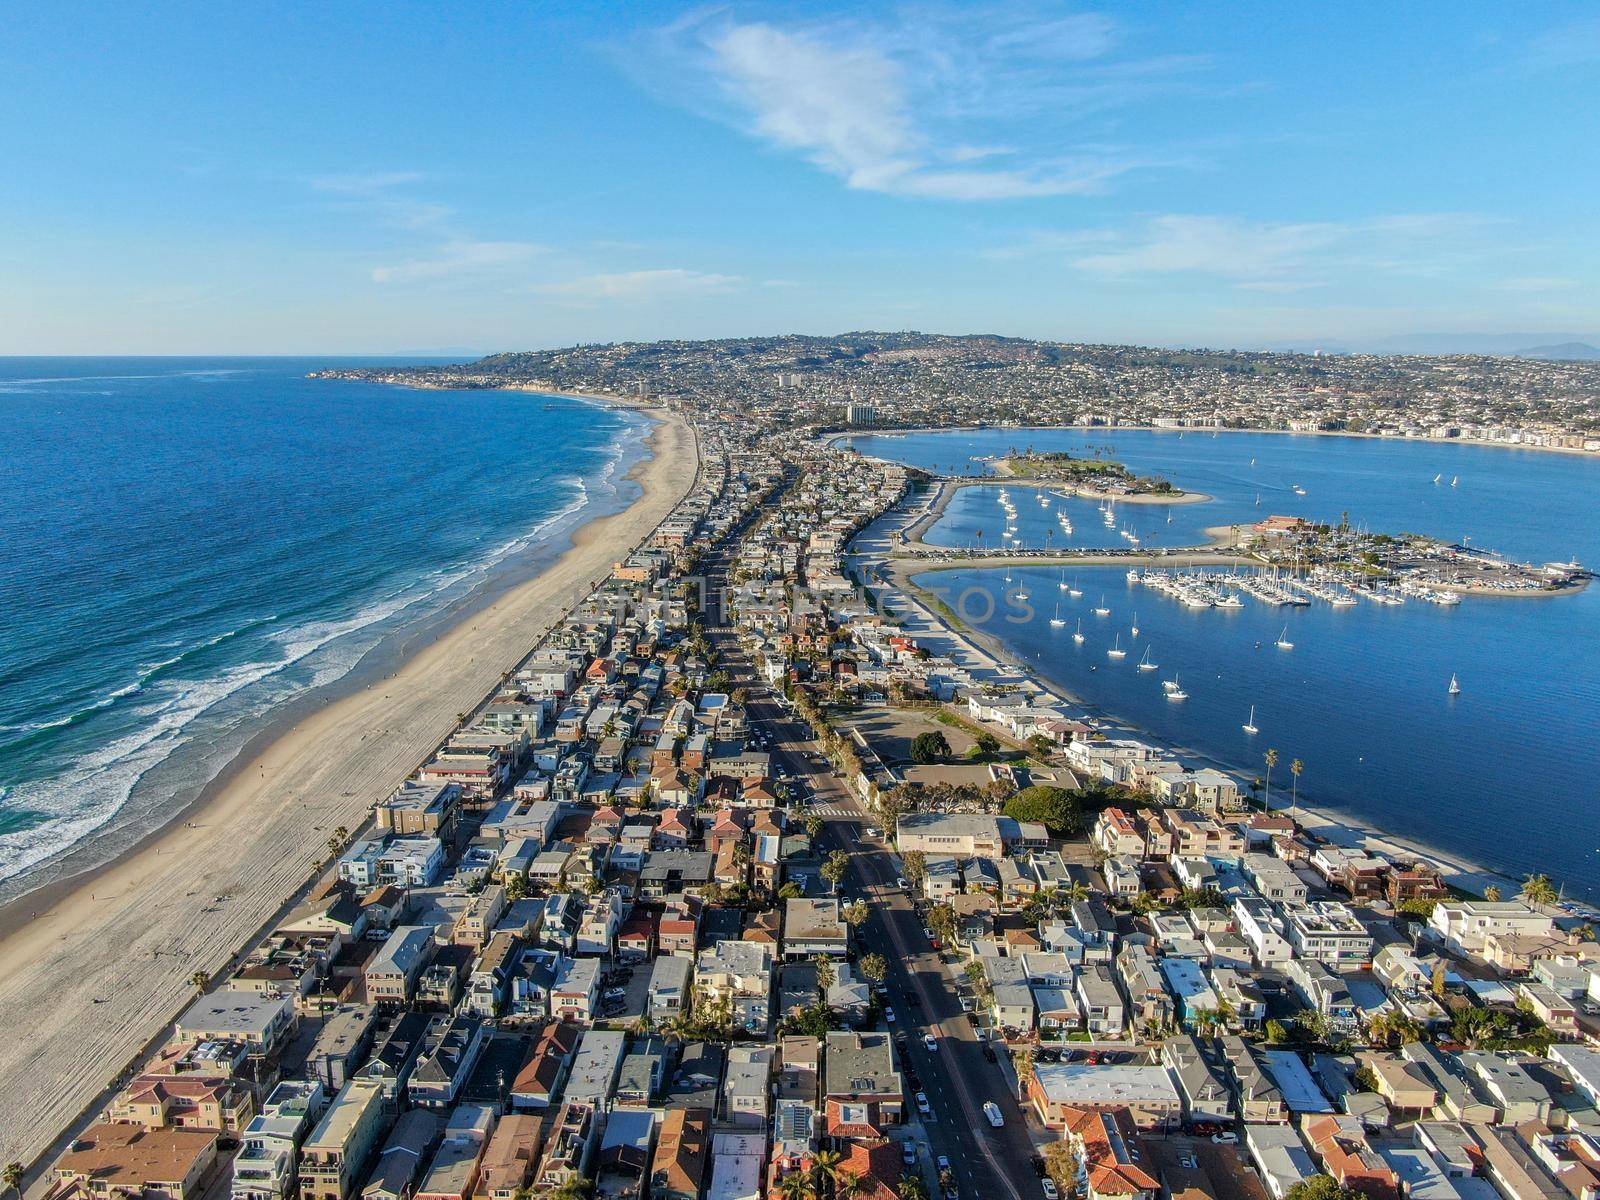 Aerial view of Mission Bay and Beaches in San Diego, California. USA. Community built on a sandbar with villas, sea port and recreational Mission Bay Park. Californian beach lifestyle.